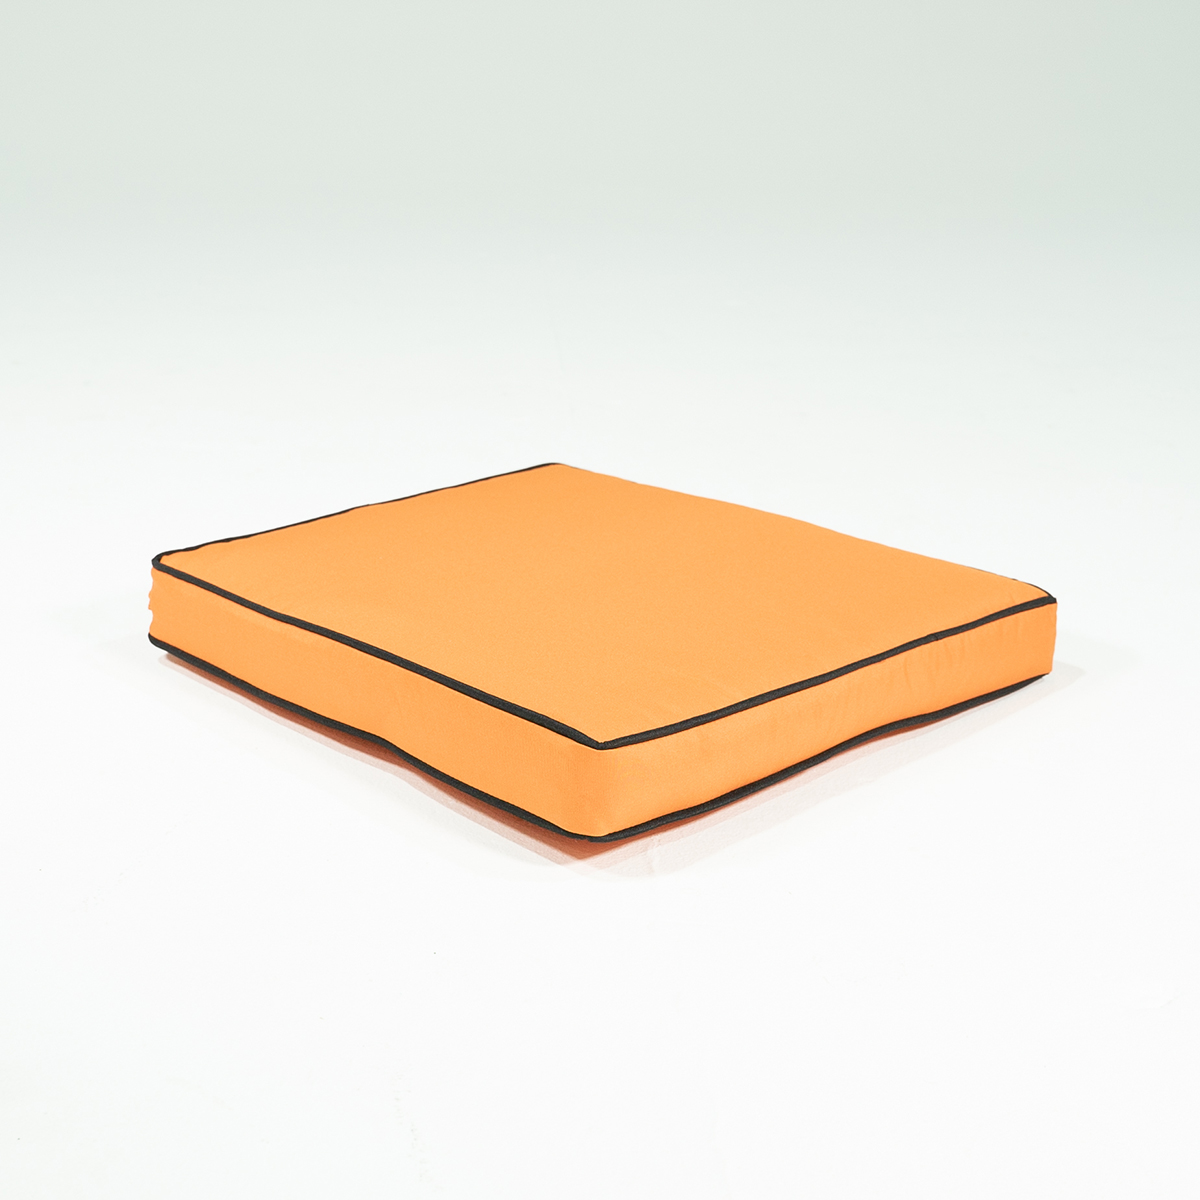 Preview our new "tangerine" cushion colour	